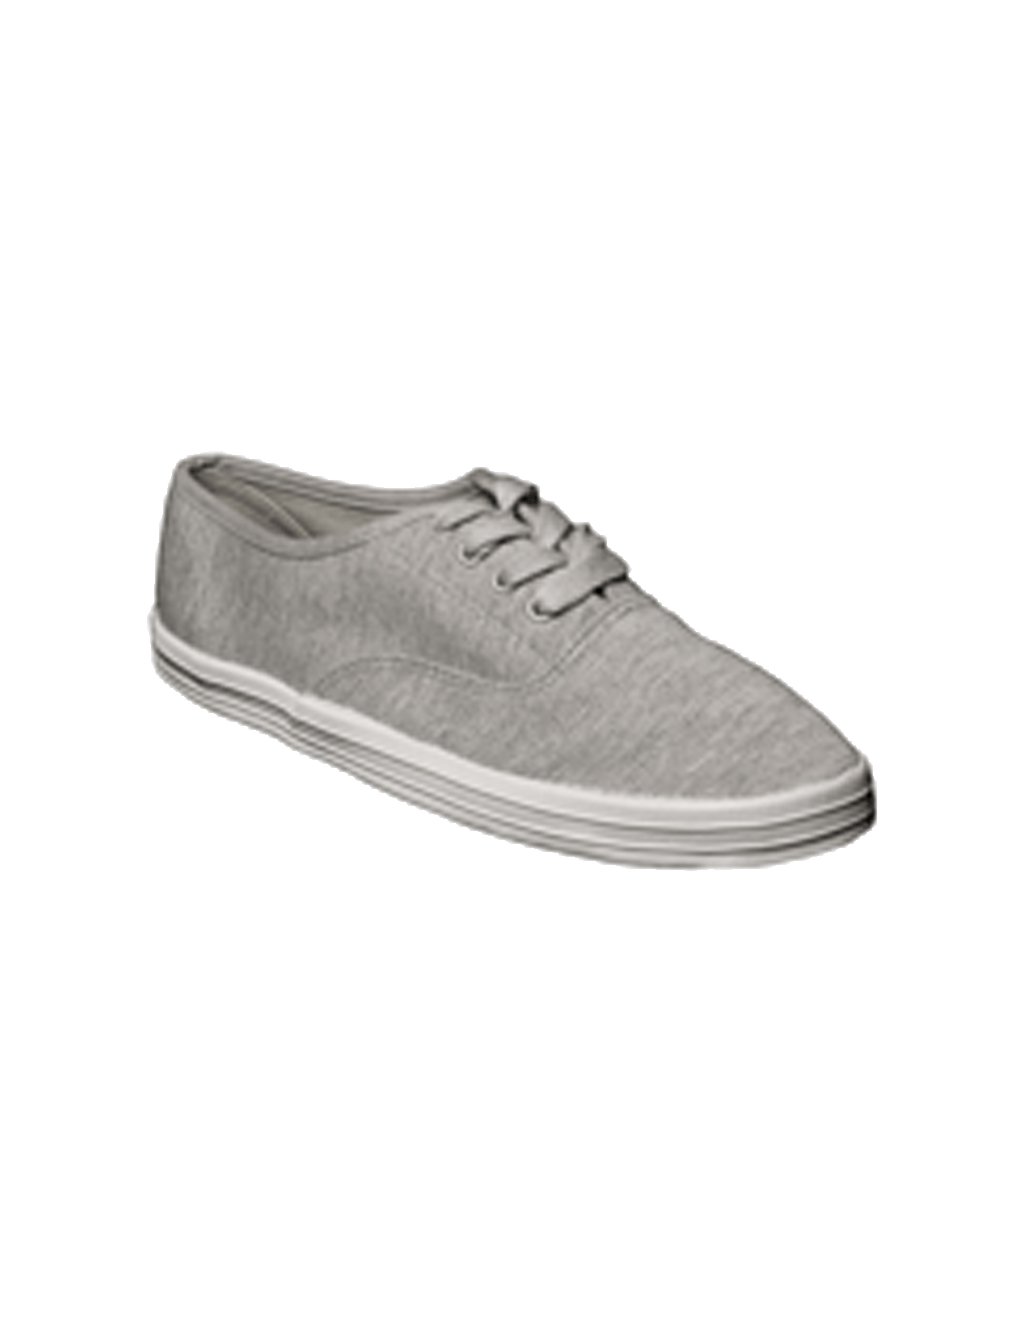 RABEN Canvas Sneaker Lace Up 628 Grey Knitted - Raben Footwear